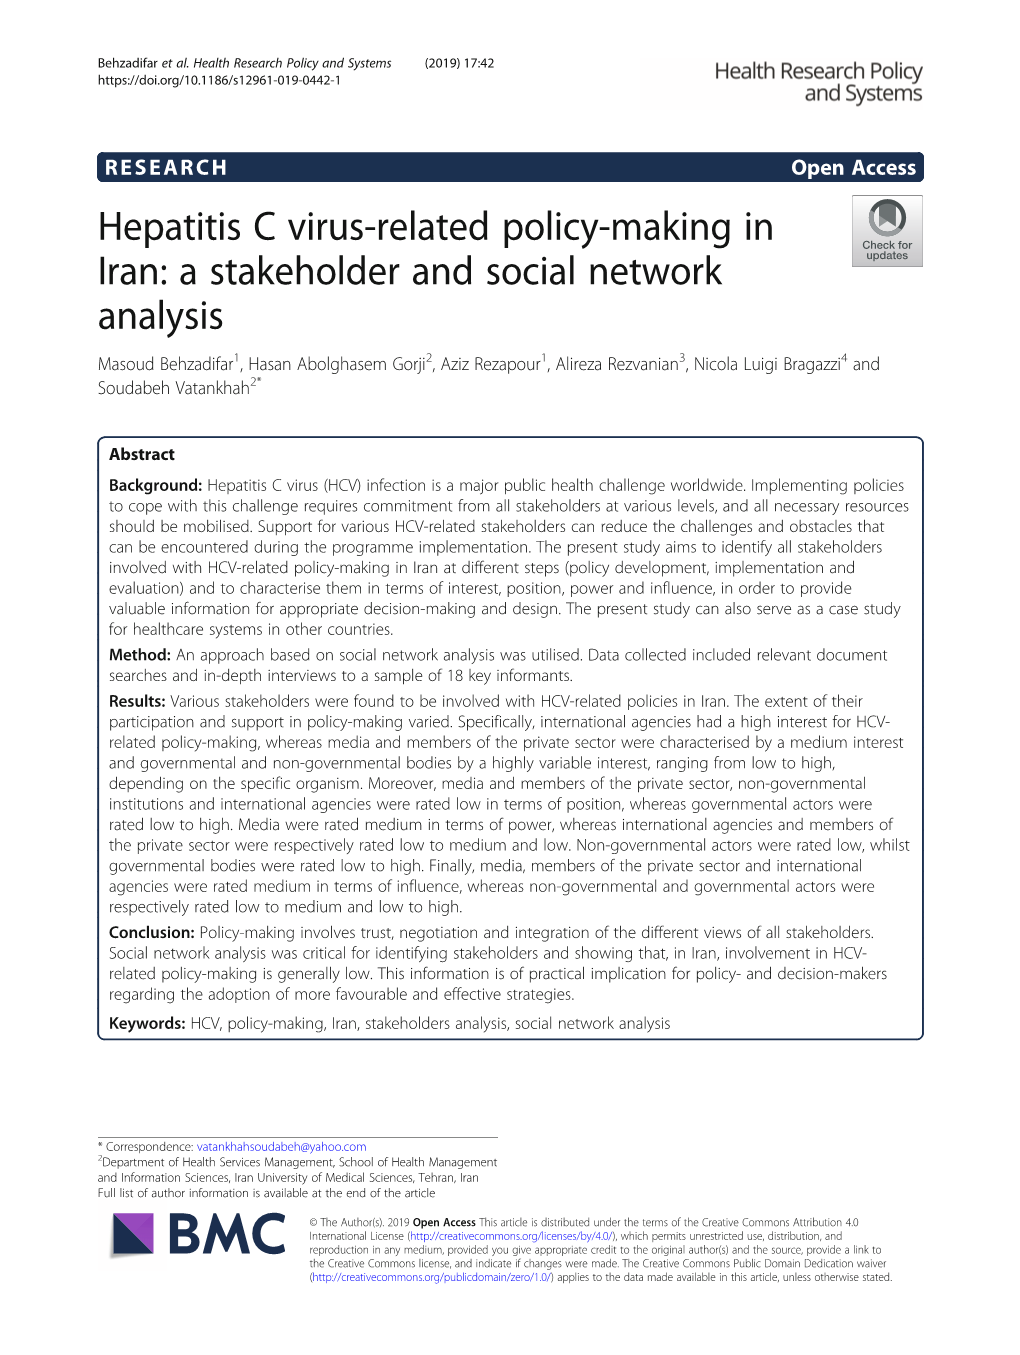 Hepatitis C Virus-Related Policy-Making in Iran: a Stakeholder and Social Network Analysis